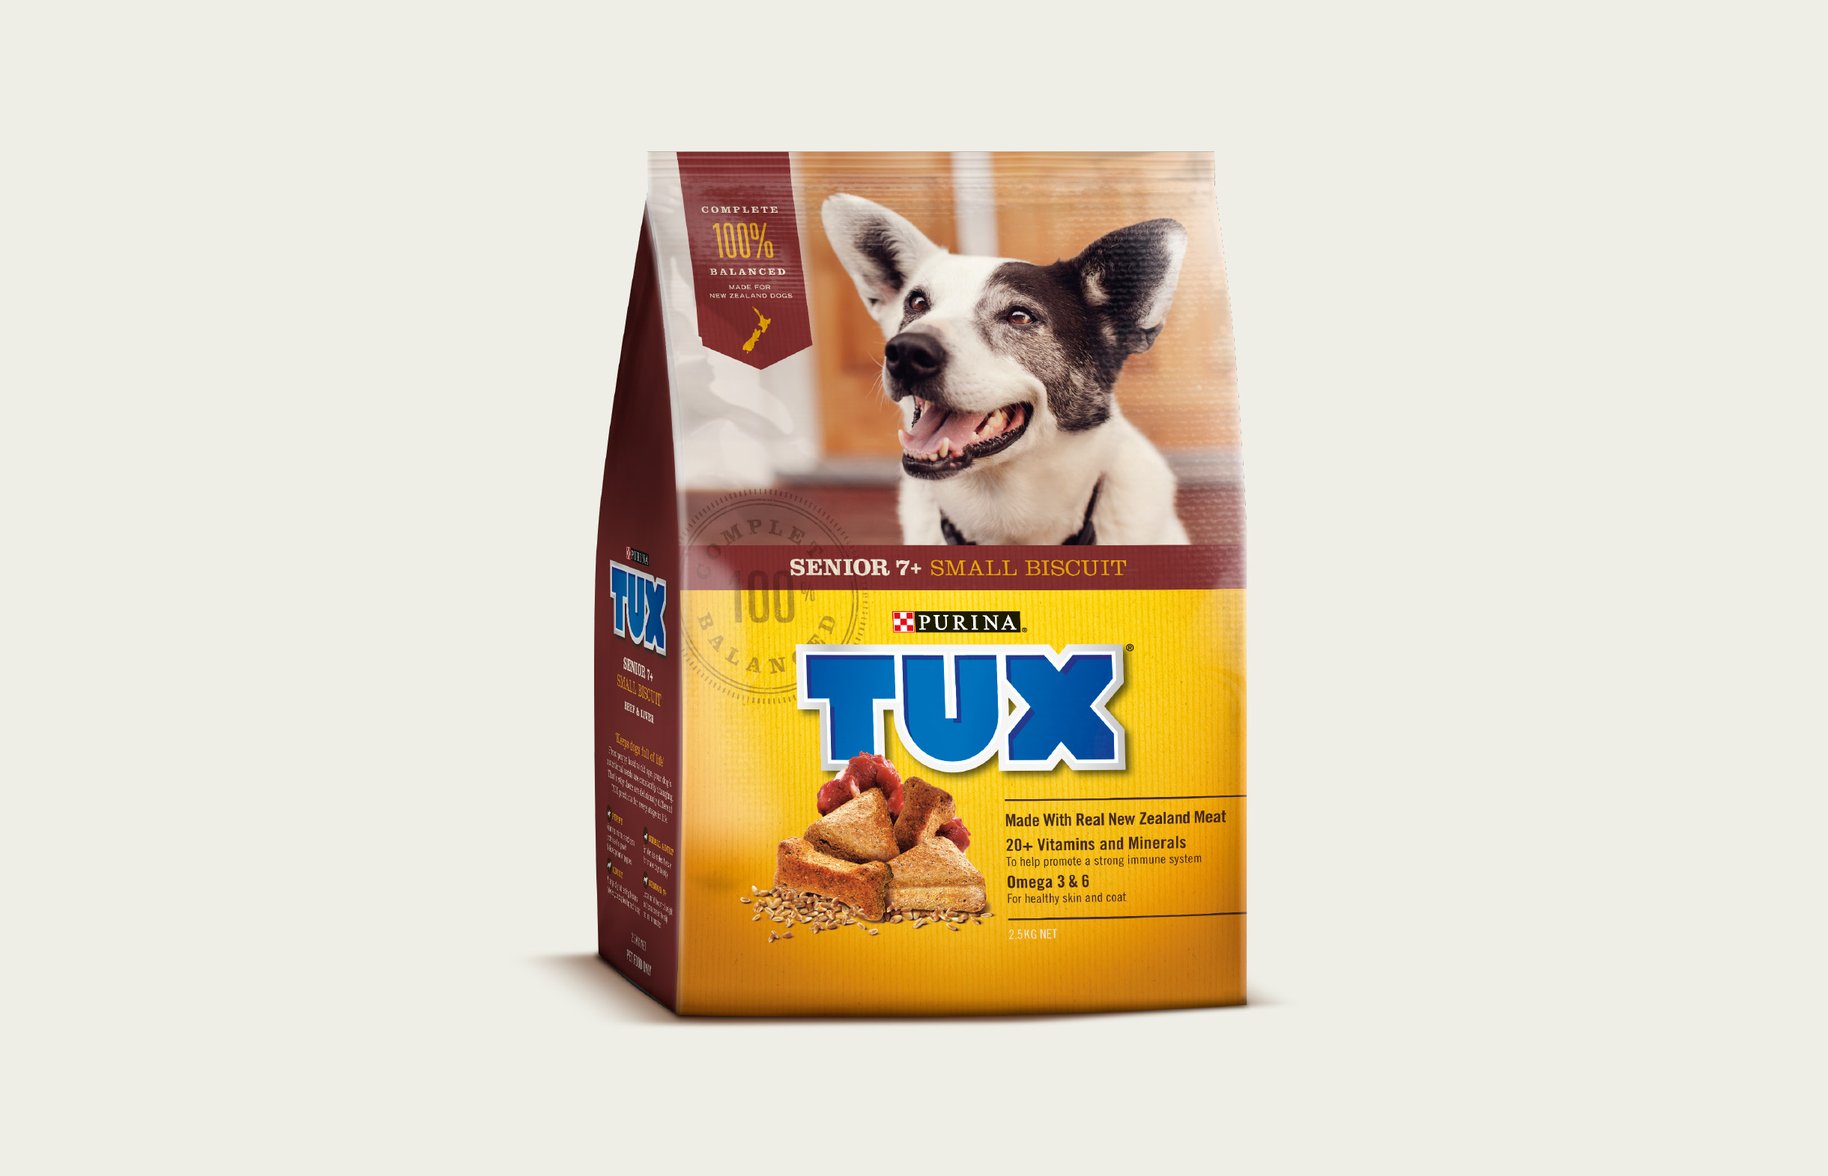 Tux Senior 7+ Small Biscuit packaging